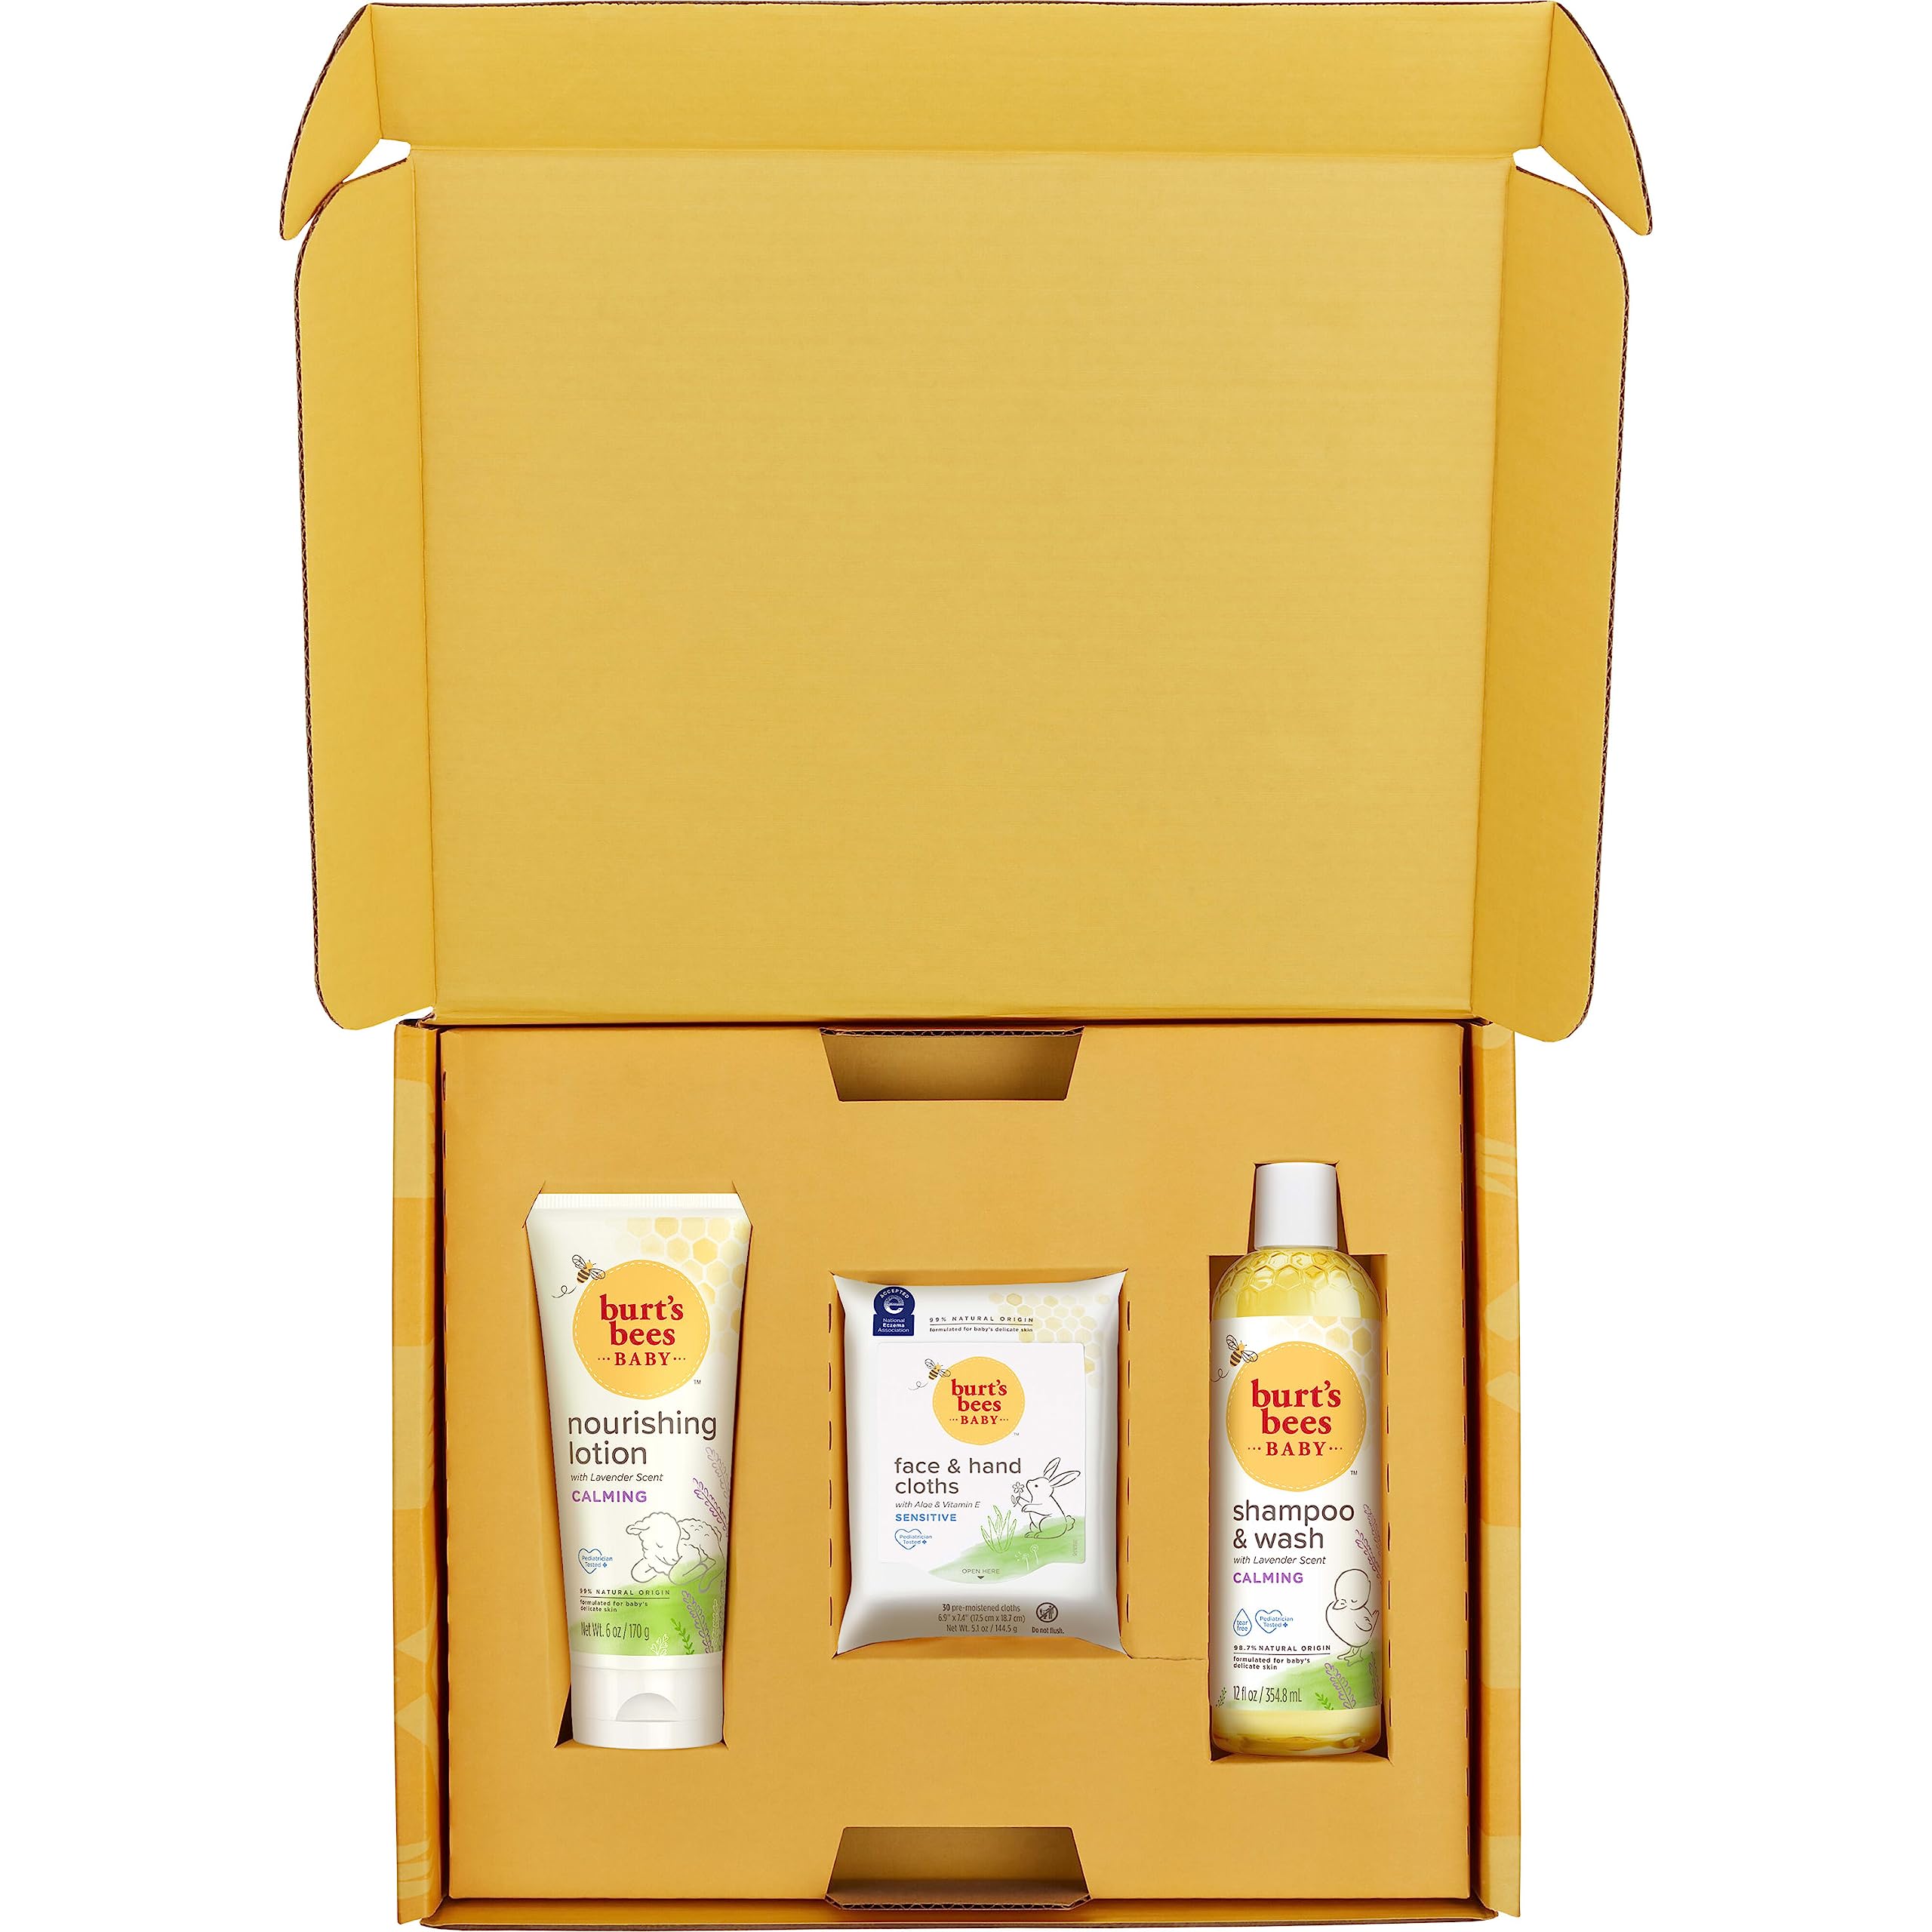 Burt's Bees Baby Gift Set for Baby Showers, Includes Baby Shampoo and Wash, Baby Body Lotion, Baby Wipes and Cloths, naturally-derived Origin Skincare, 1-Pack